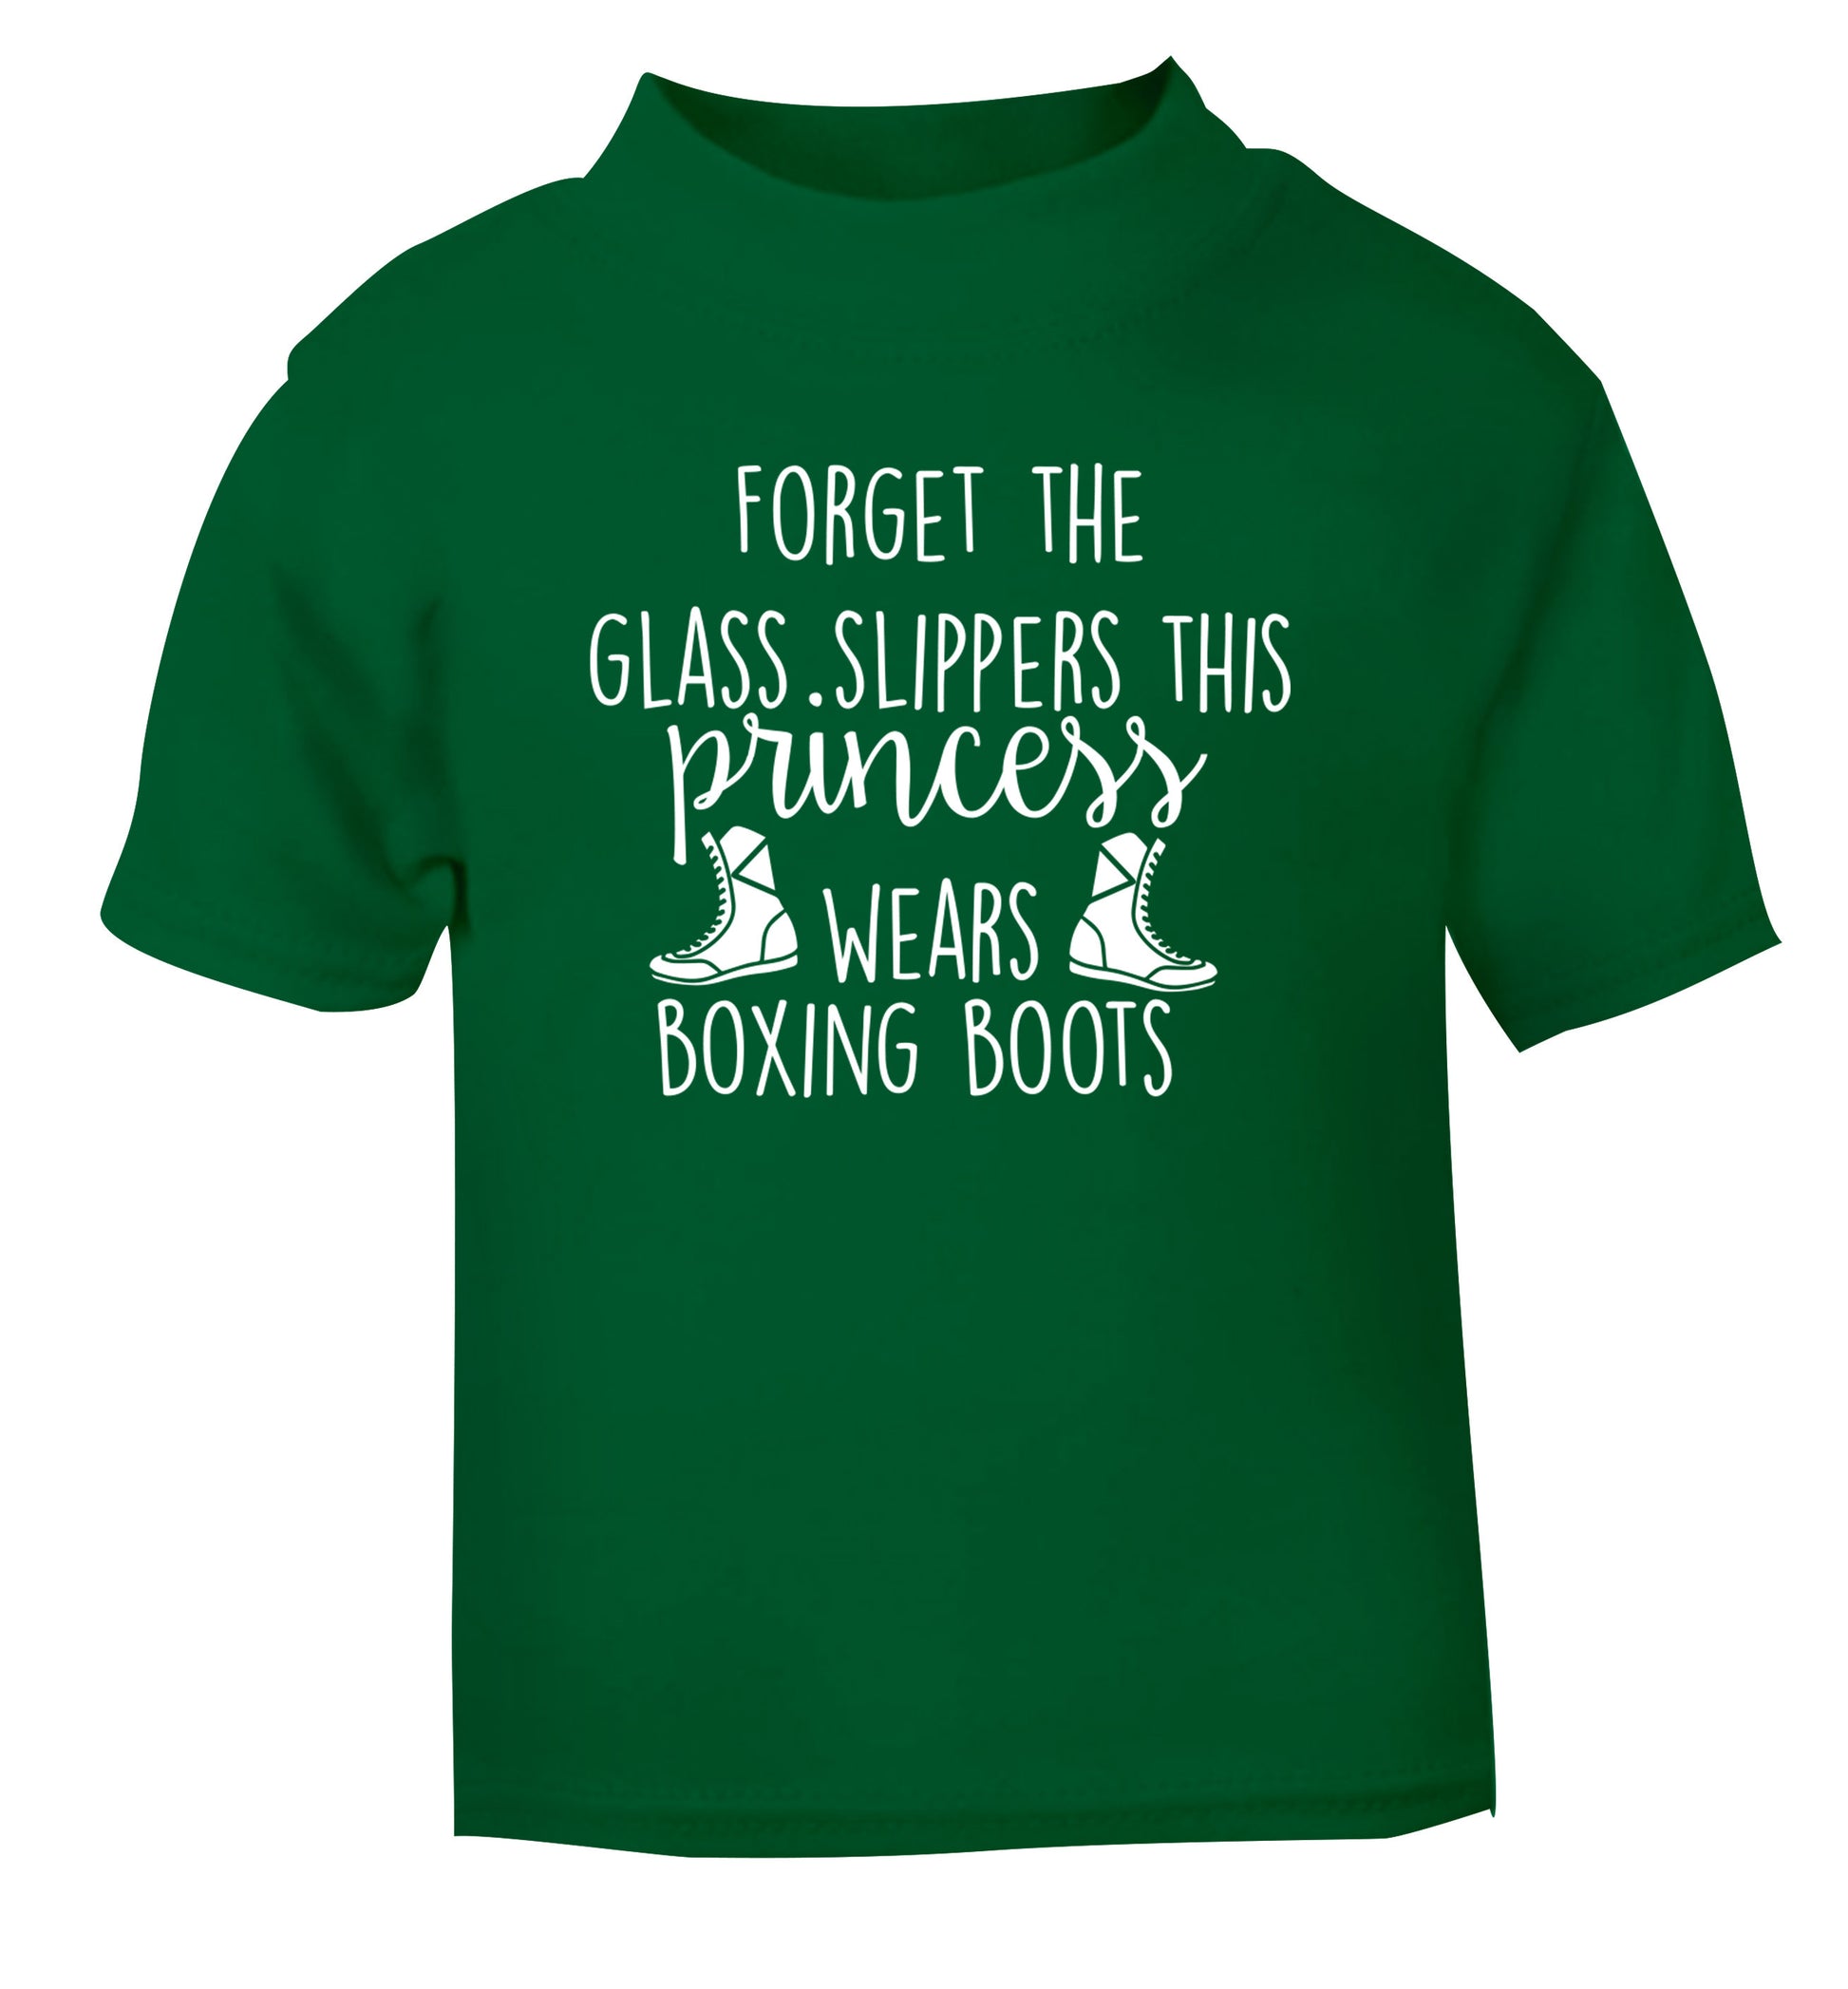 Forget the glass slippers this princess wears boxing boots green Baby Toddler Tshirt 2 Years